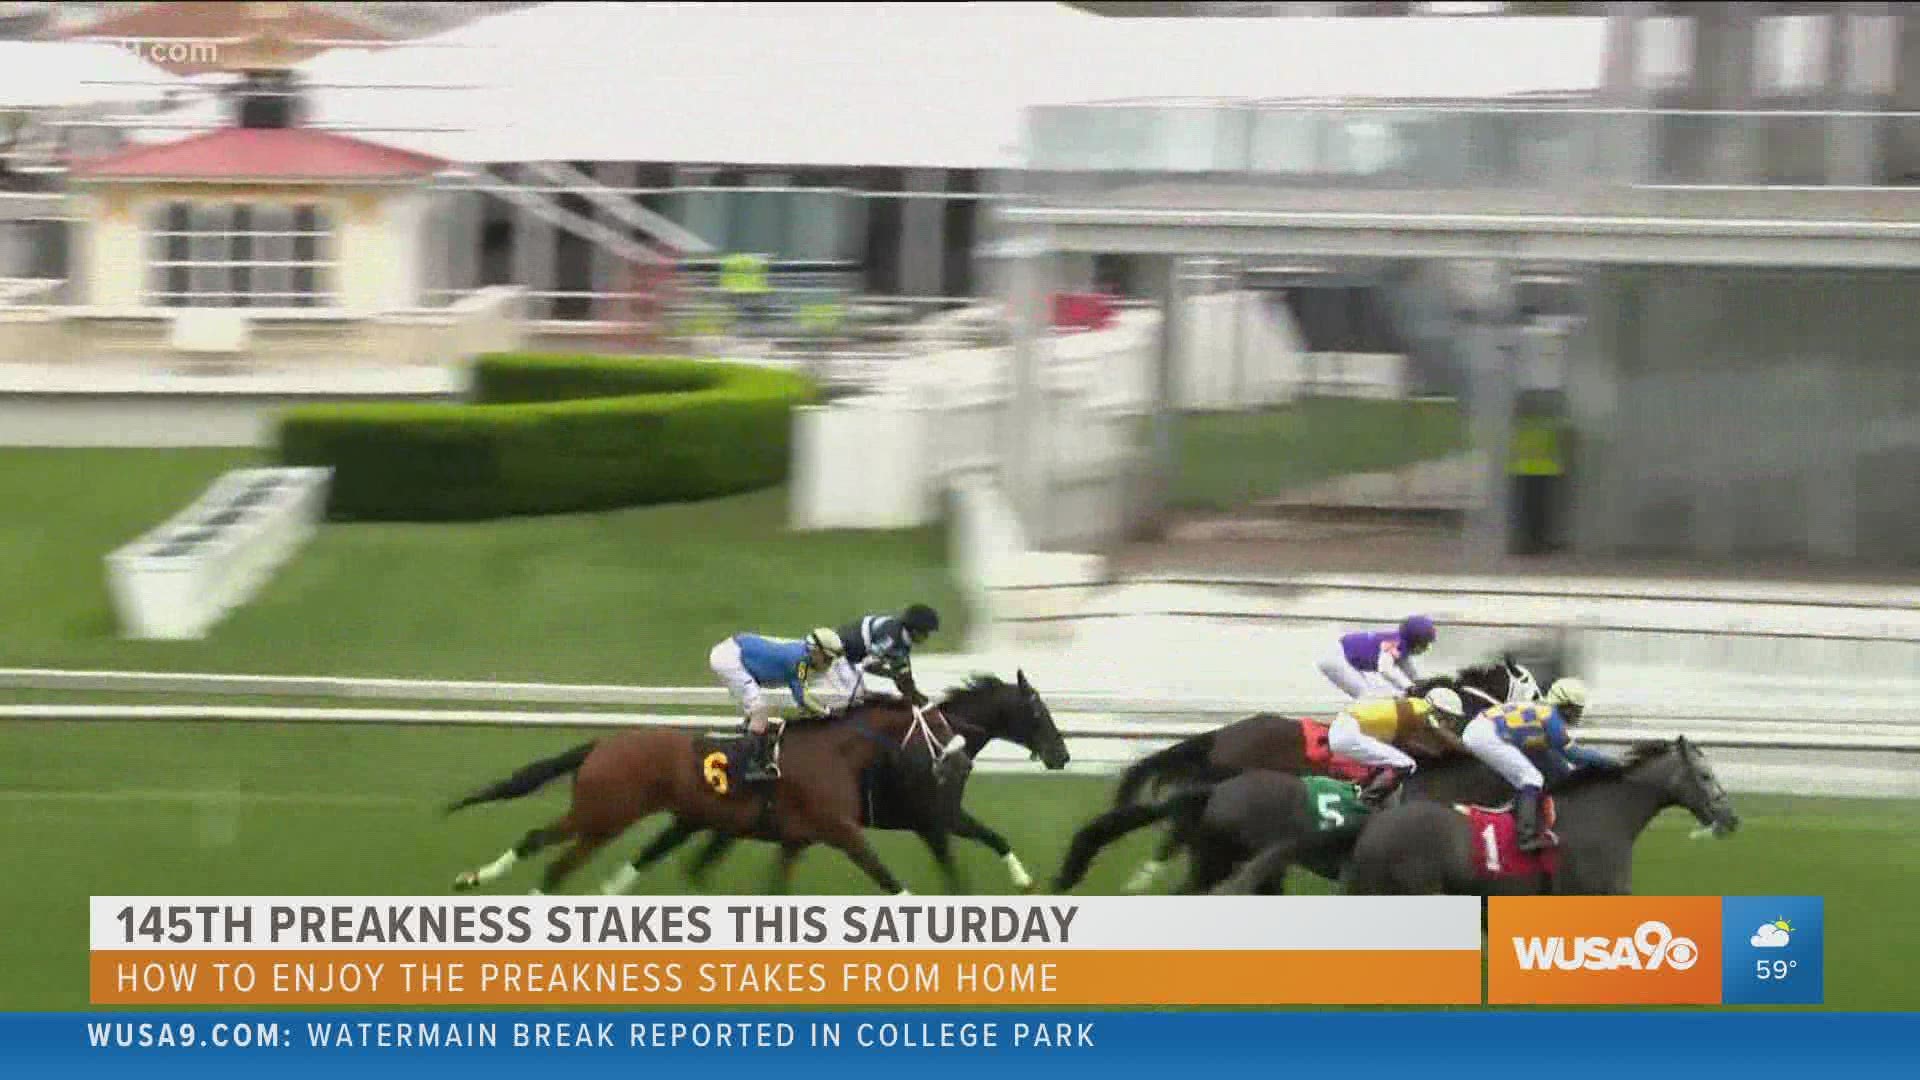 Naomi Tucker and Ashley Mailoux, on-air handicappers for the Preakness Stakes share how you can enjoy the races at home.